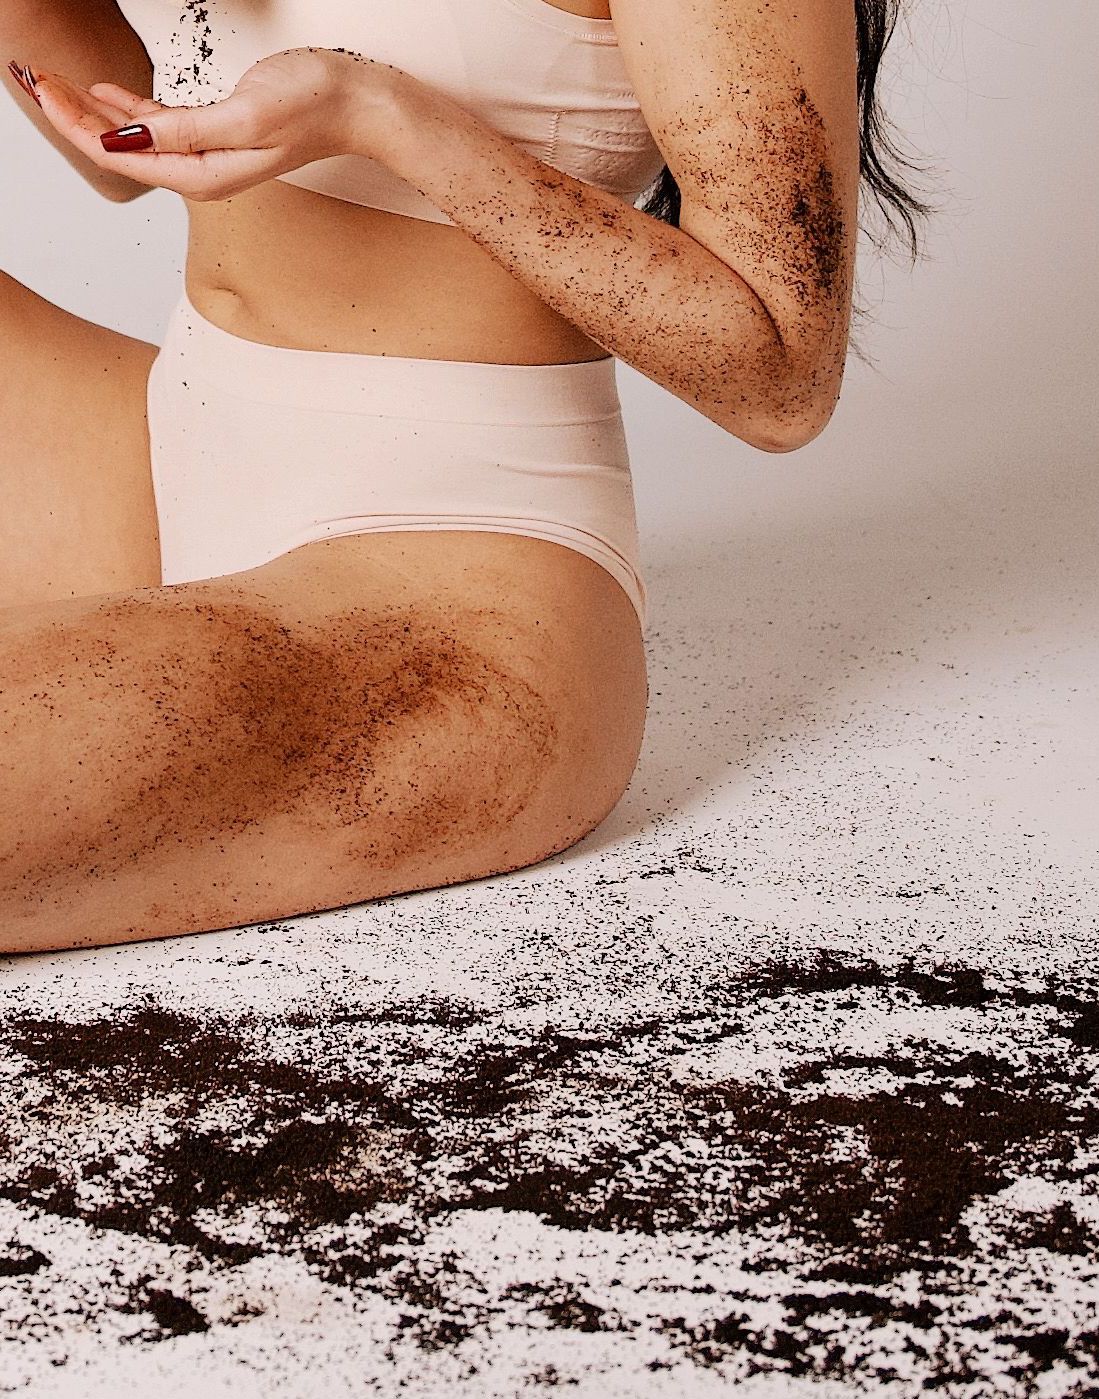 Dry Brush or Body Scrub? What You Need To Know To Be An Exfoliation Pro